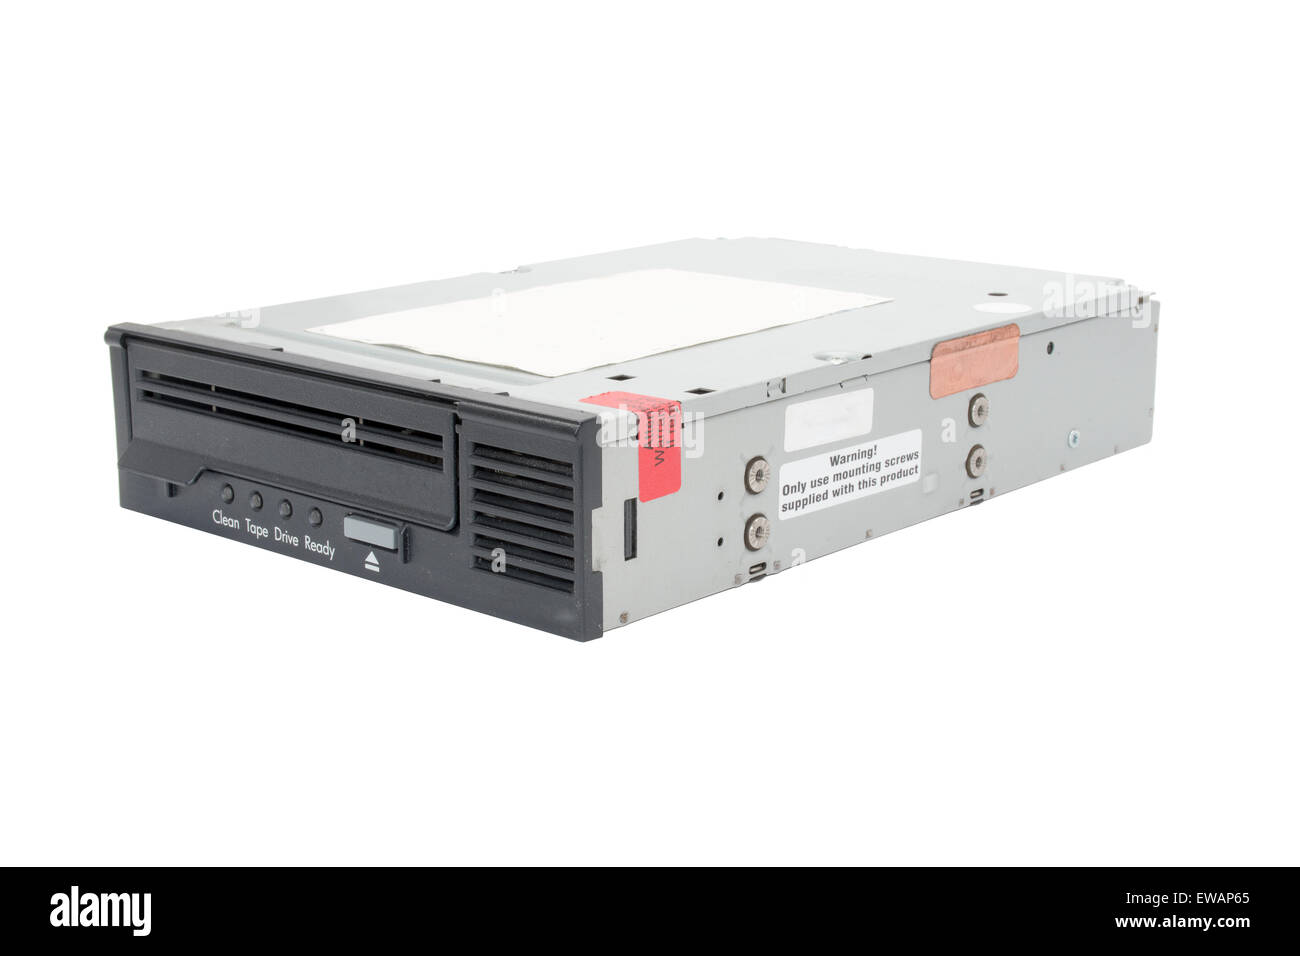 Backup Tape Drive on a white background Stock Photo